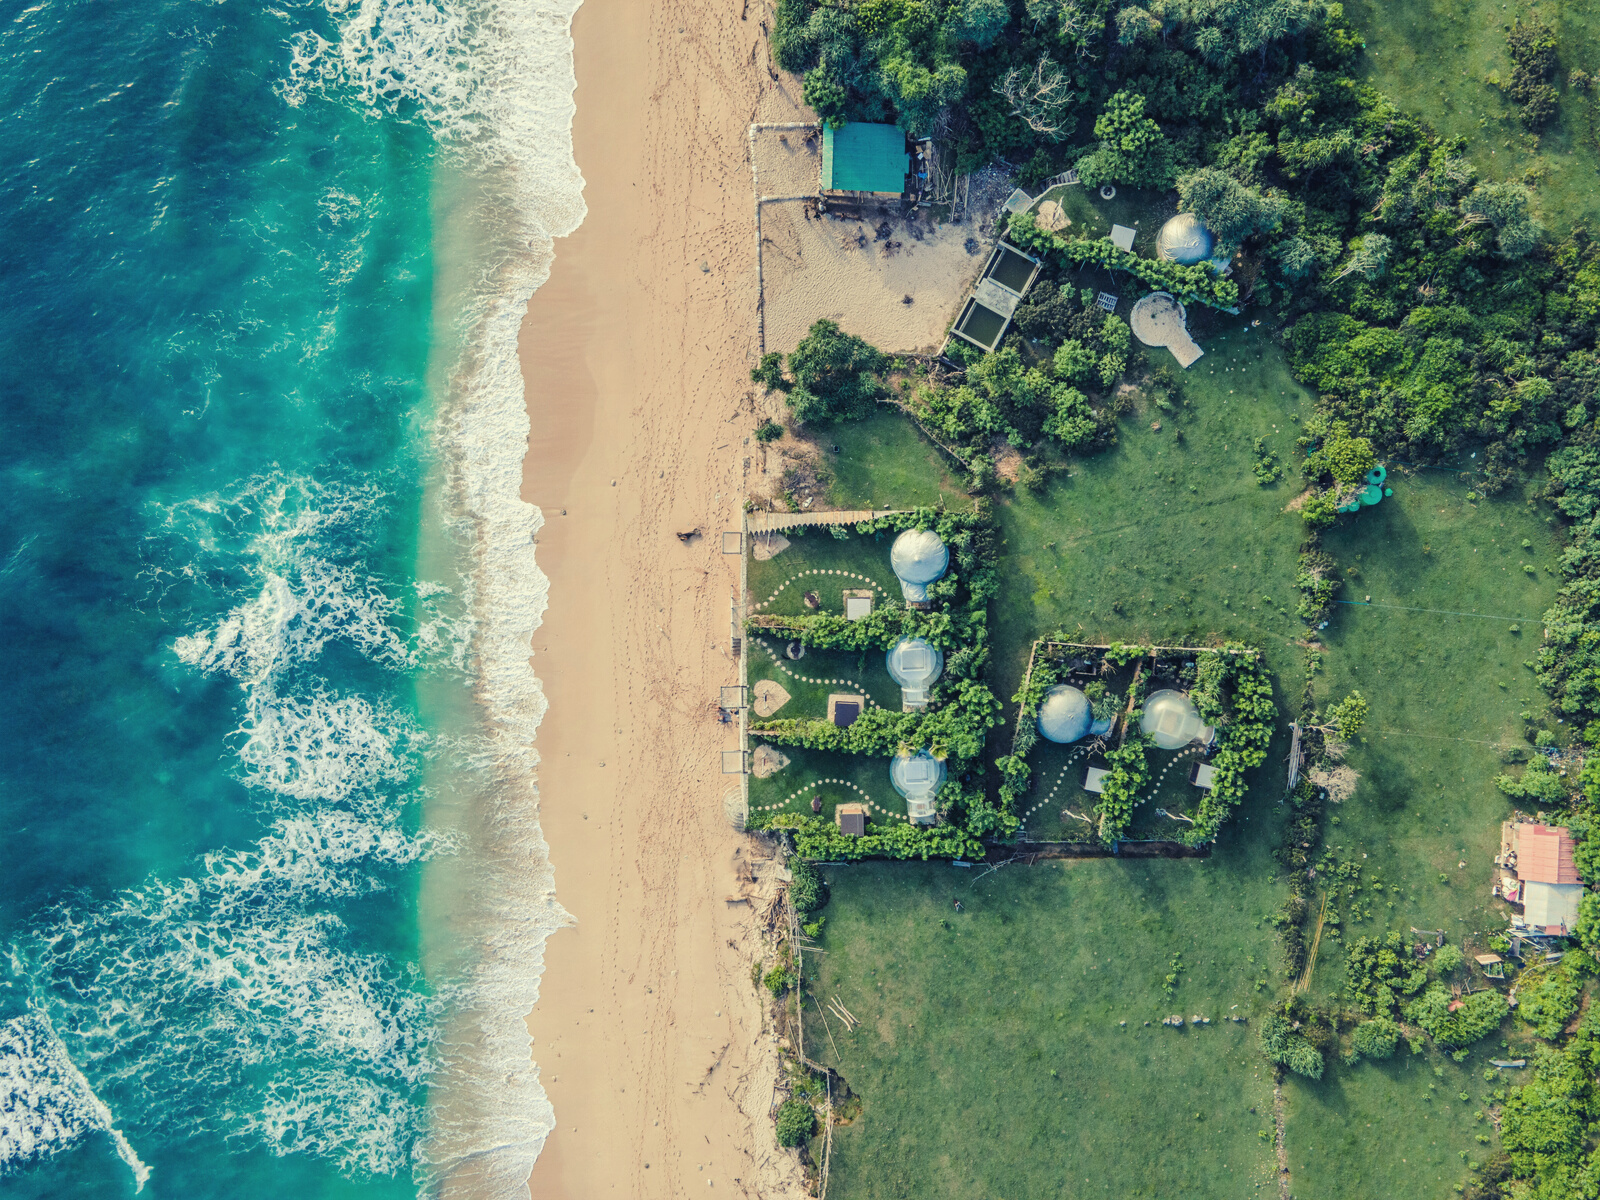 Aerial View of the Beach in Bali